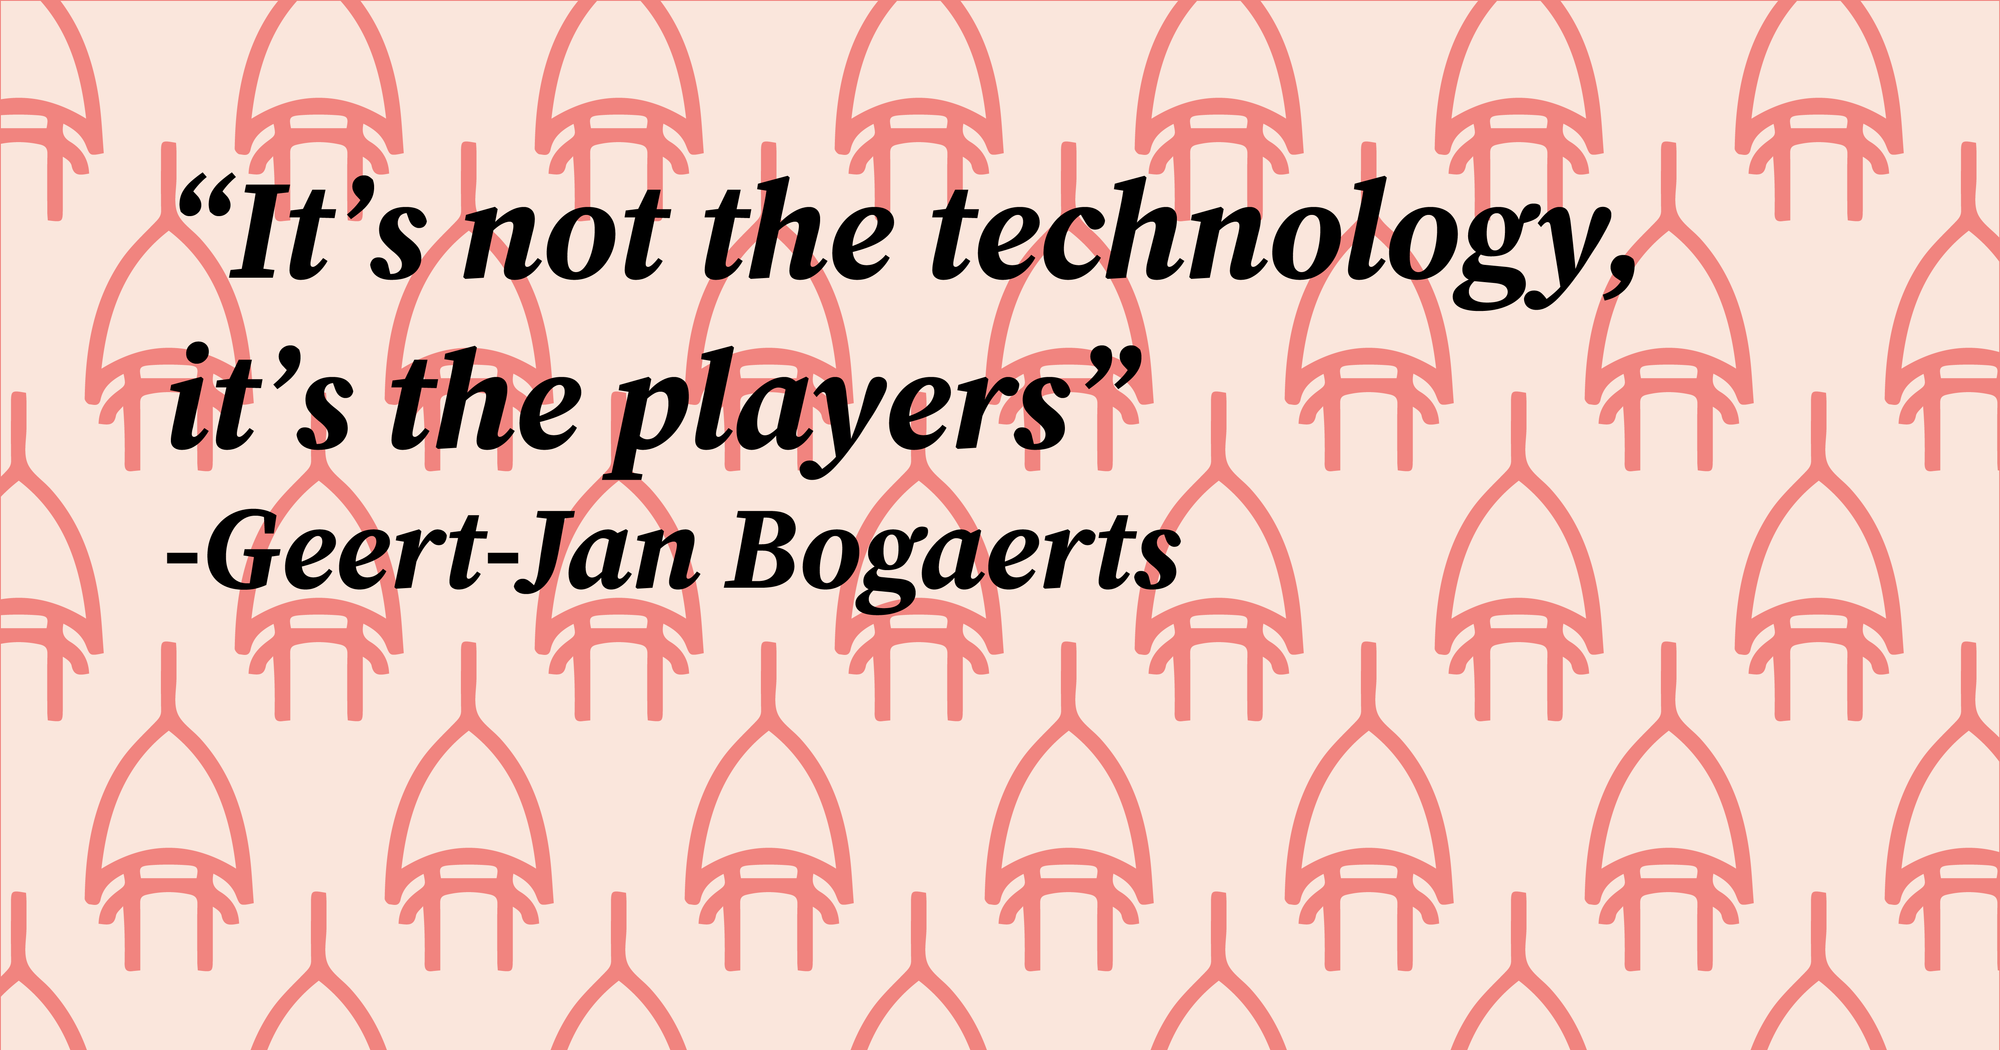 Geert-Jan Bogaerts: “Don’t Look At Technology, Look At The Players”